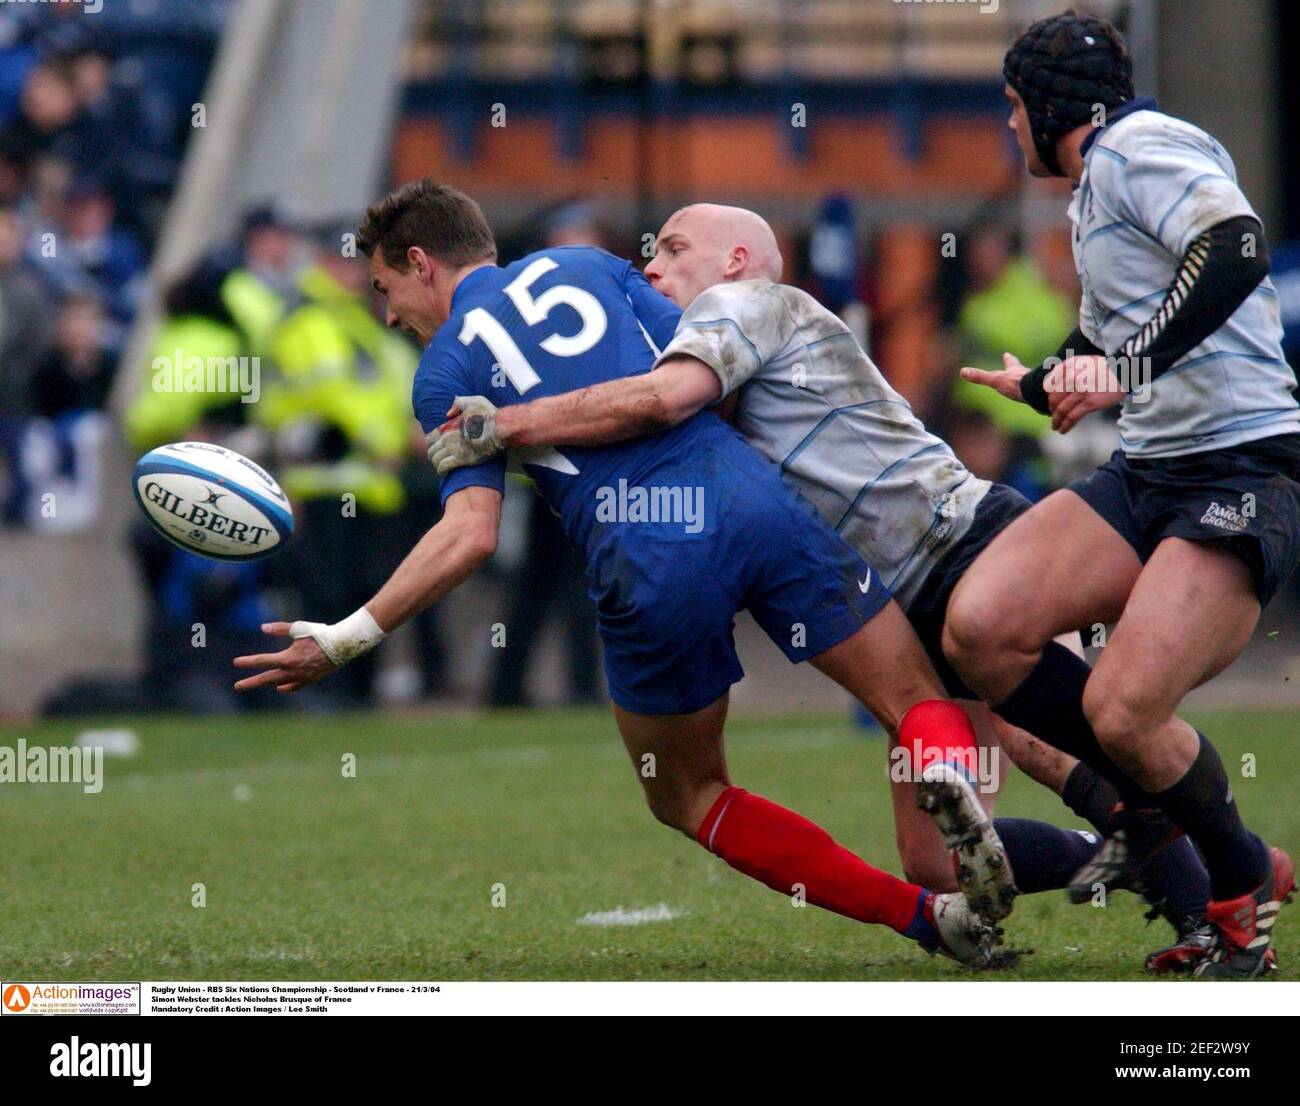 Rugby Union Rbs Six Nations Championship Scotland V France 21 3 04 Simon Webster Tackles Nicholas Brusque Of France Mandatory Credit Action Images Lee Smith Stock Photo Alamy